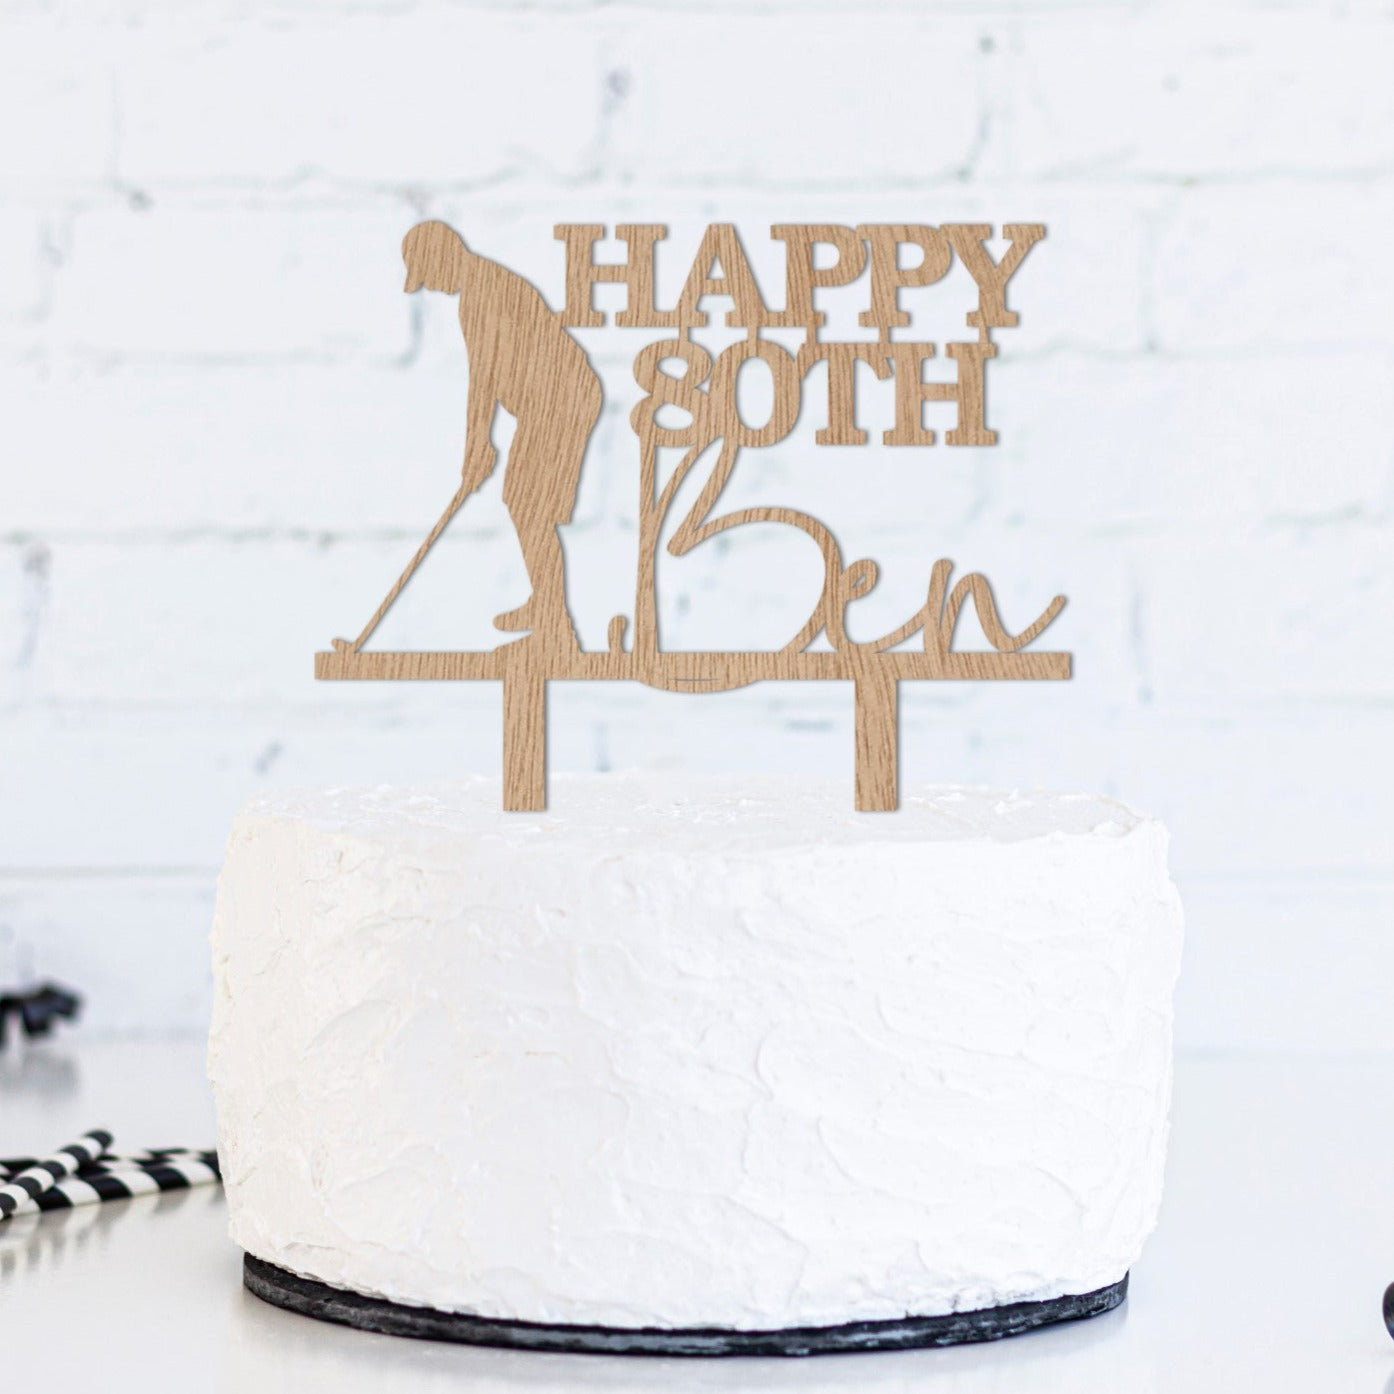 Wooden cake topper featuring a silhouette of a golfer about to take a swing